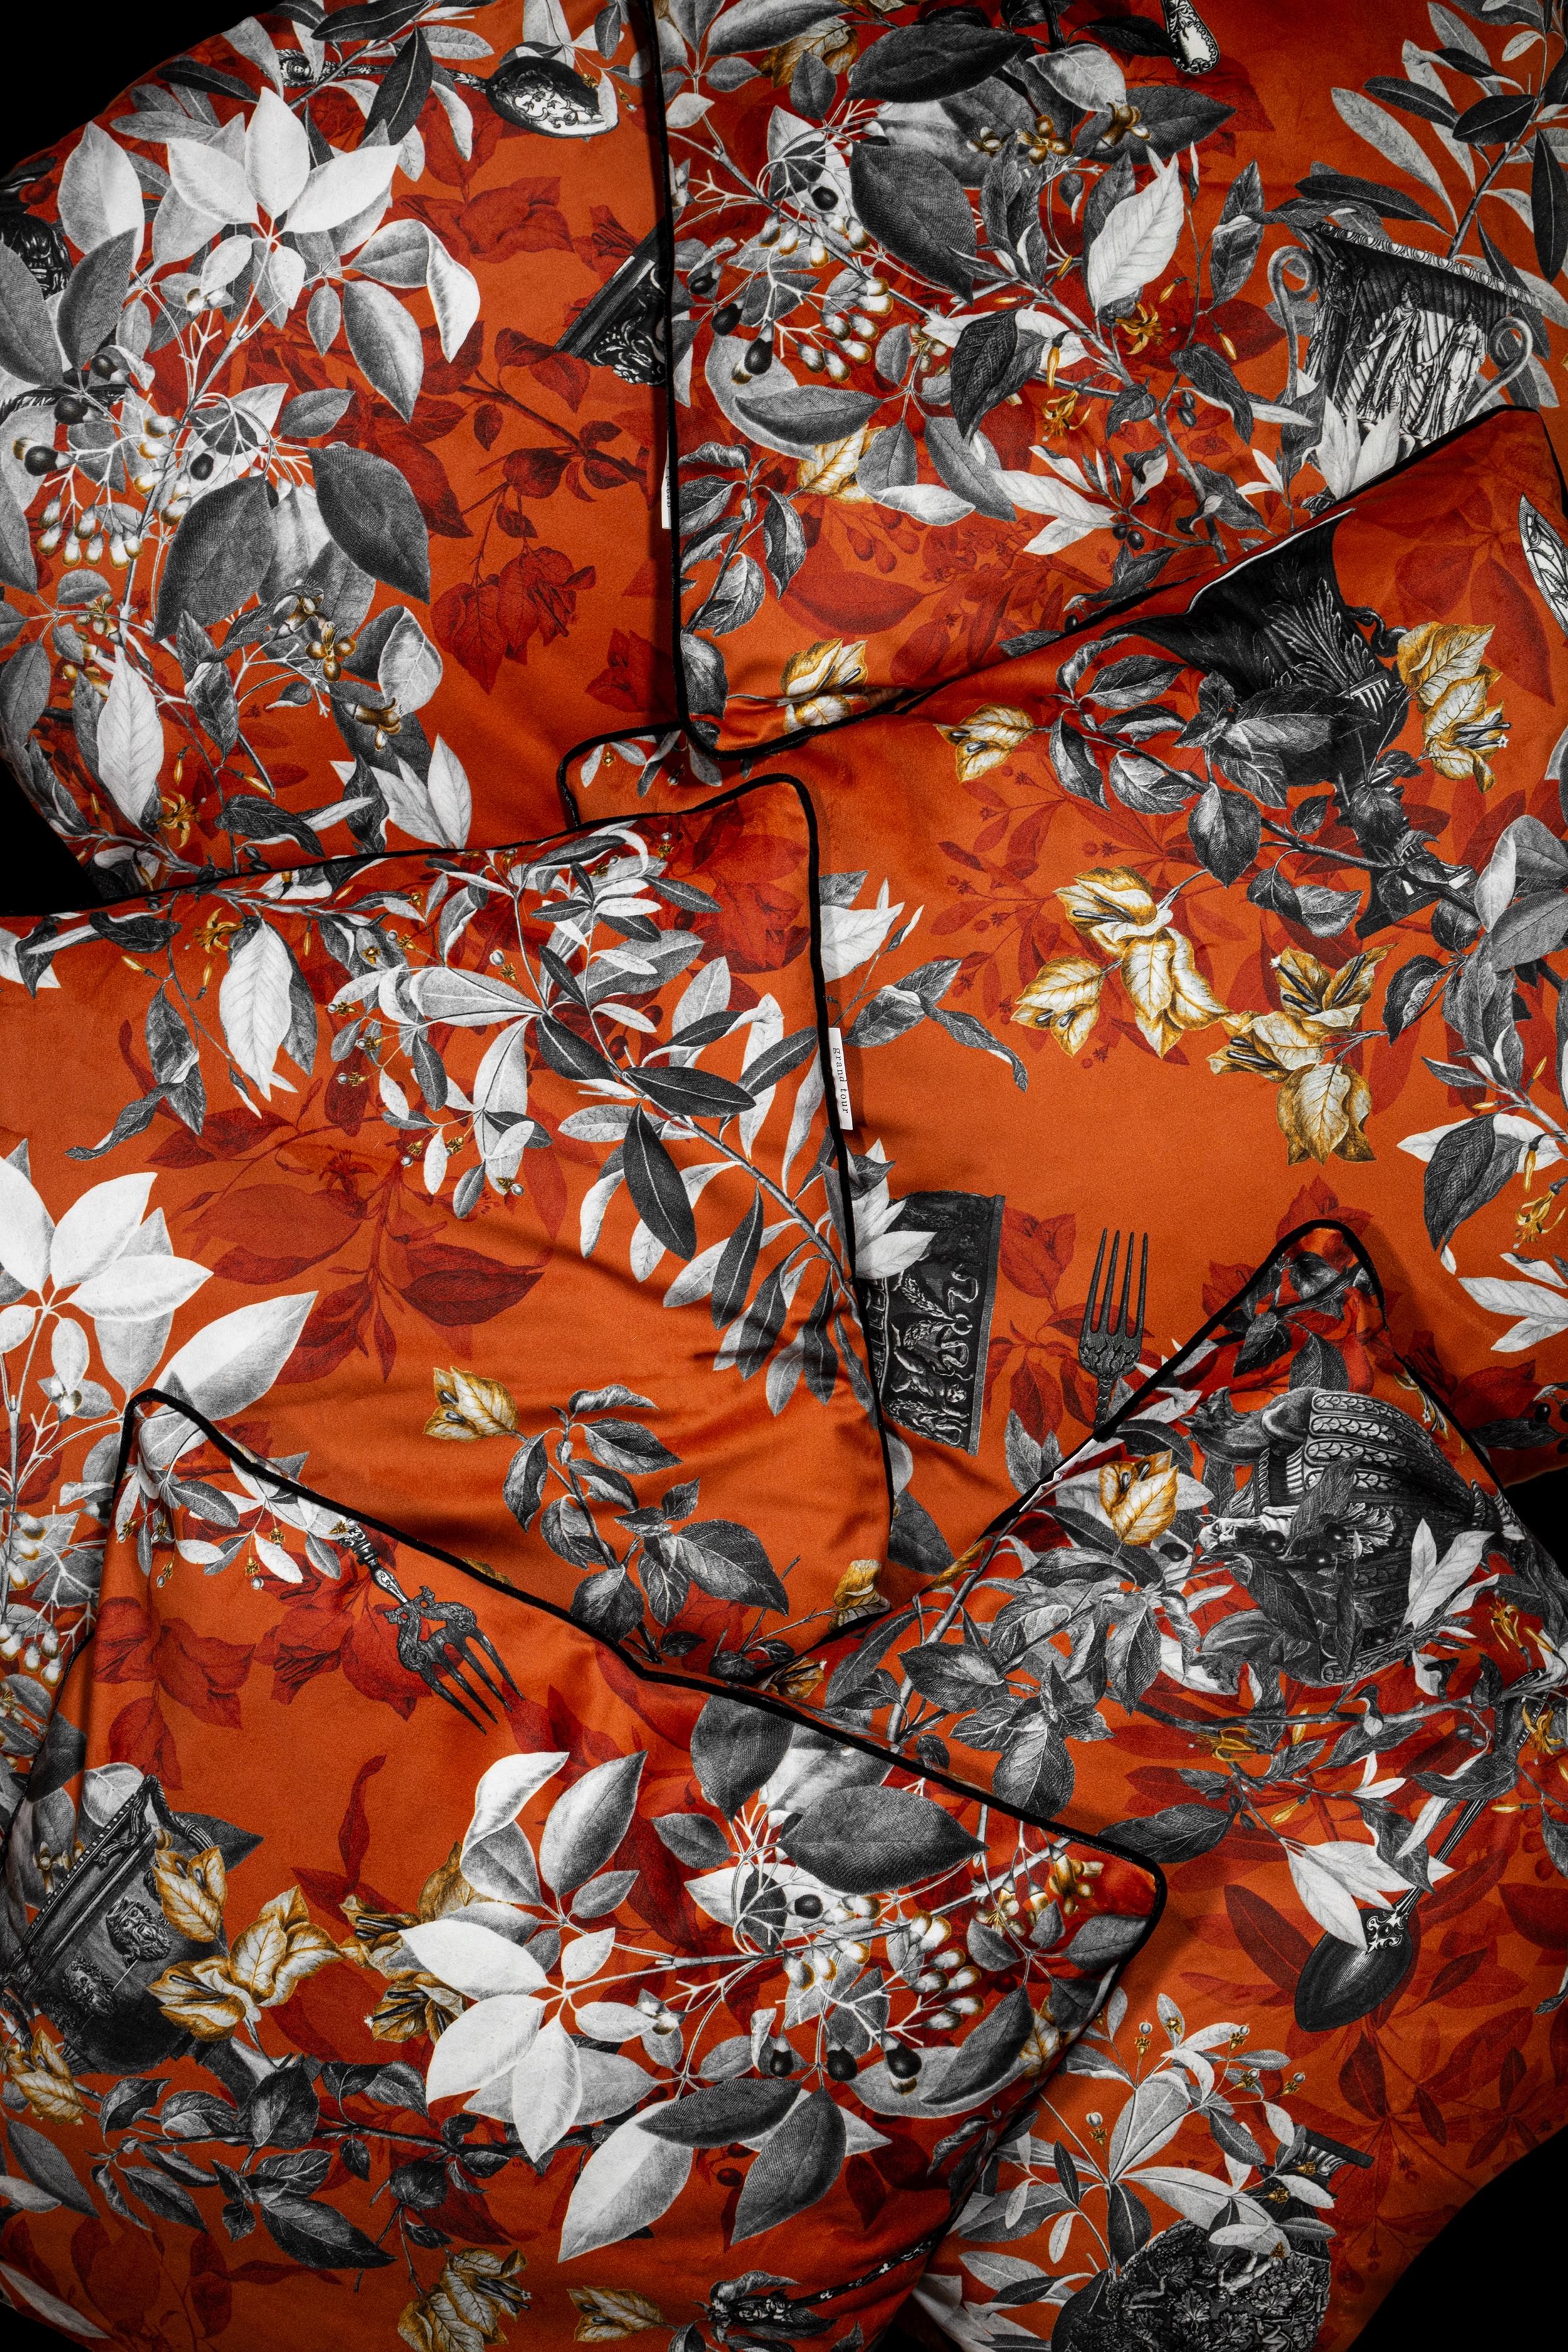 Primavera Romana pillows is a set of cushions inspired by those beautiful Italian spring days in Rome. Vibrant orange background, black and white leaves, ancient amphorae, detailed vintage cutlery and yellow flowers are merged together in a dynamic